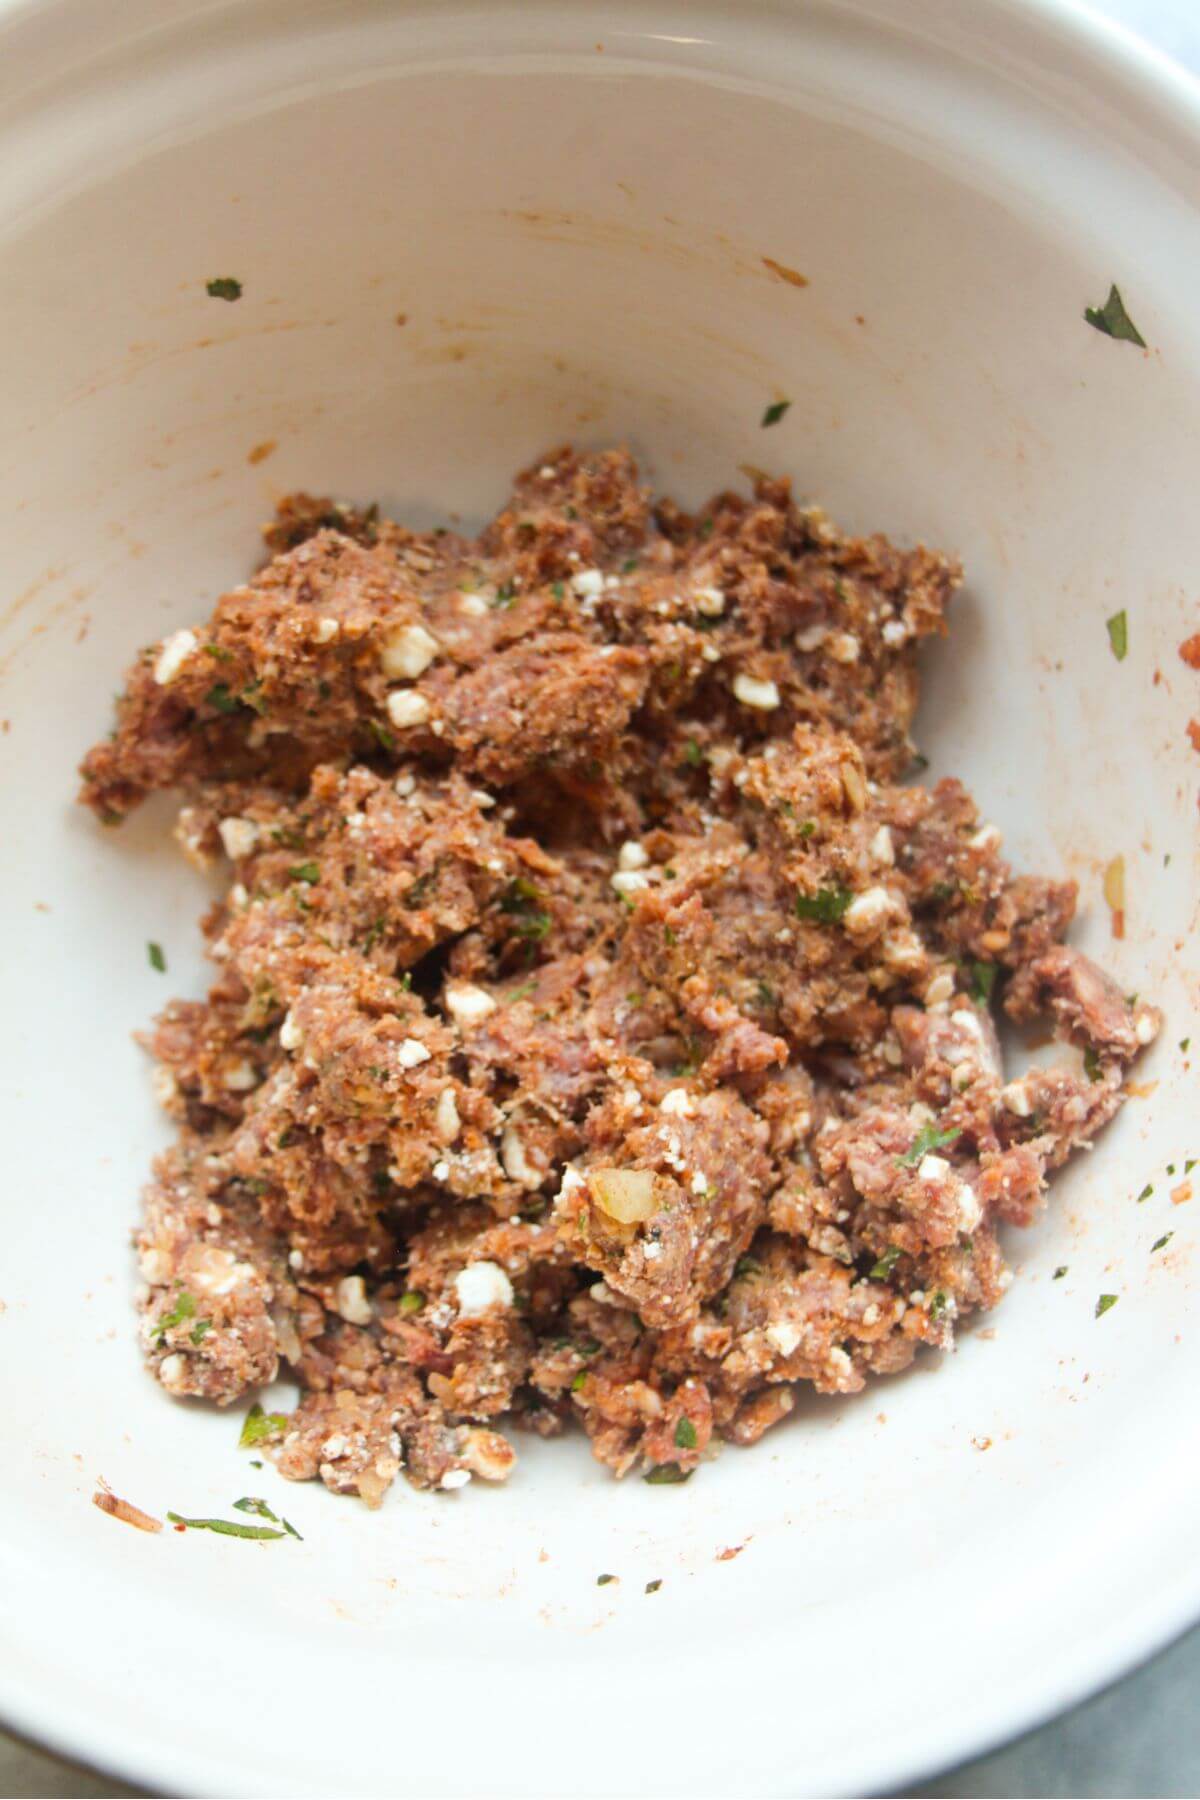 Lamb mince mixed with feta, spices, onion in a large white mixing bowl.